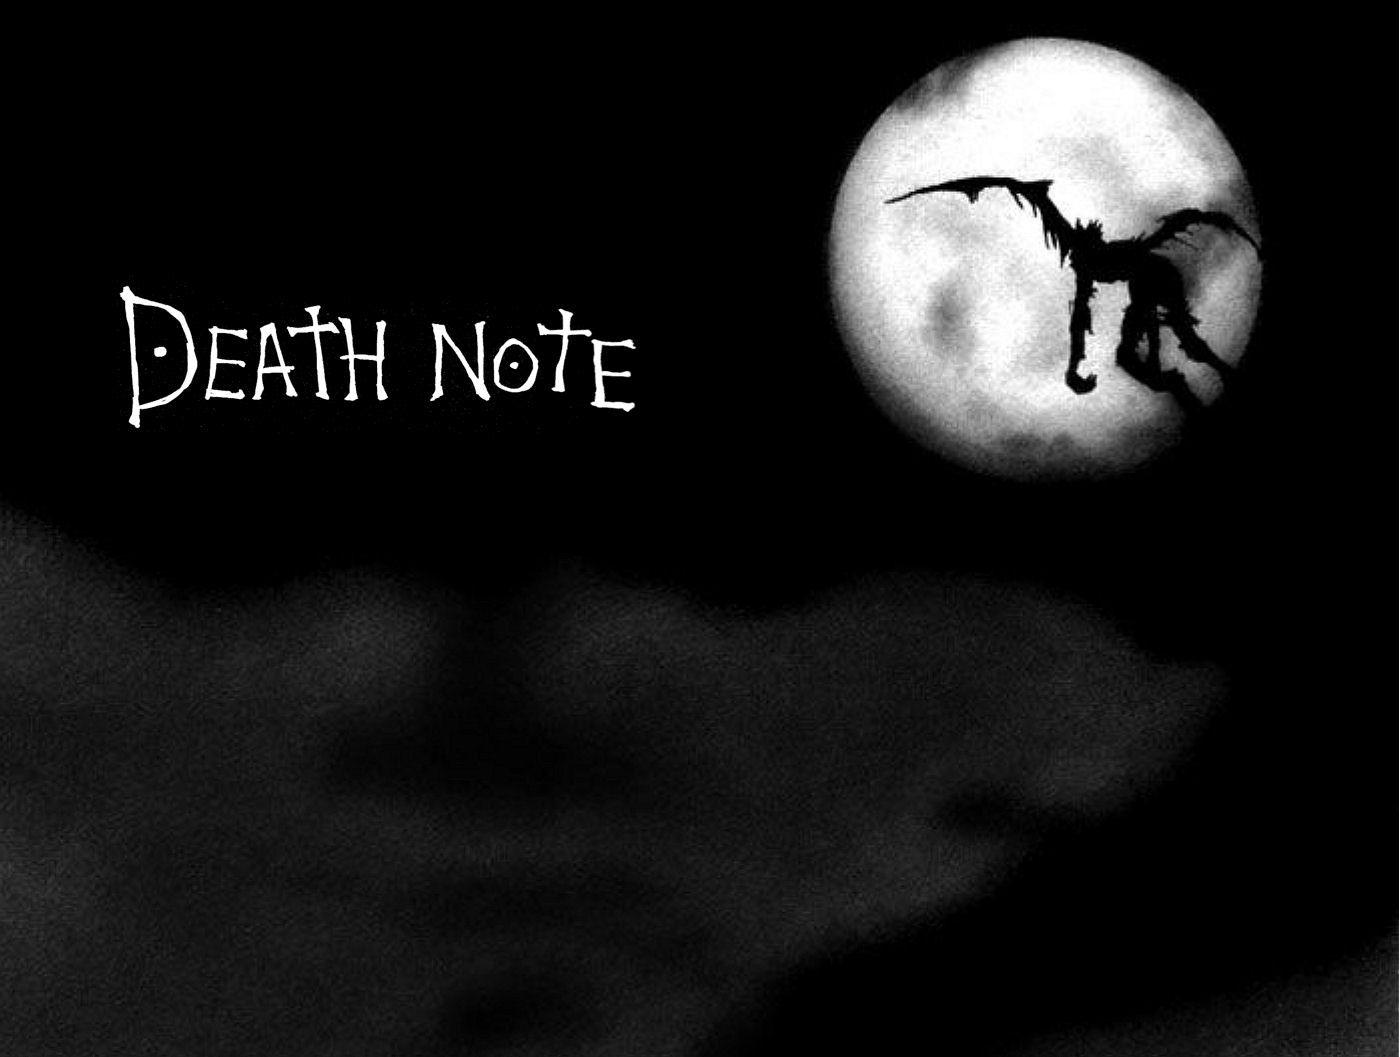 Death Note 壁紙